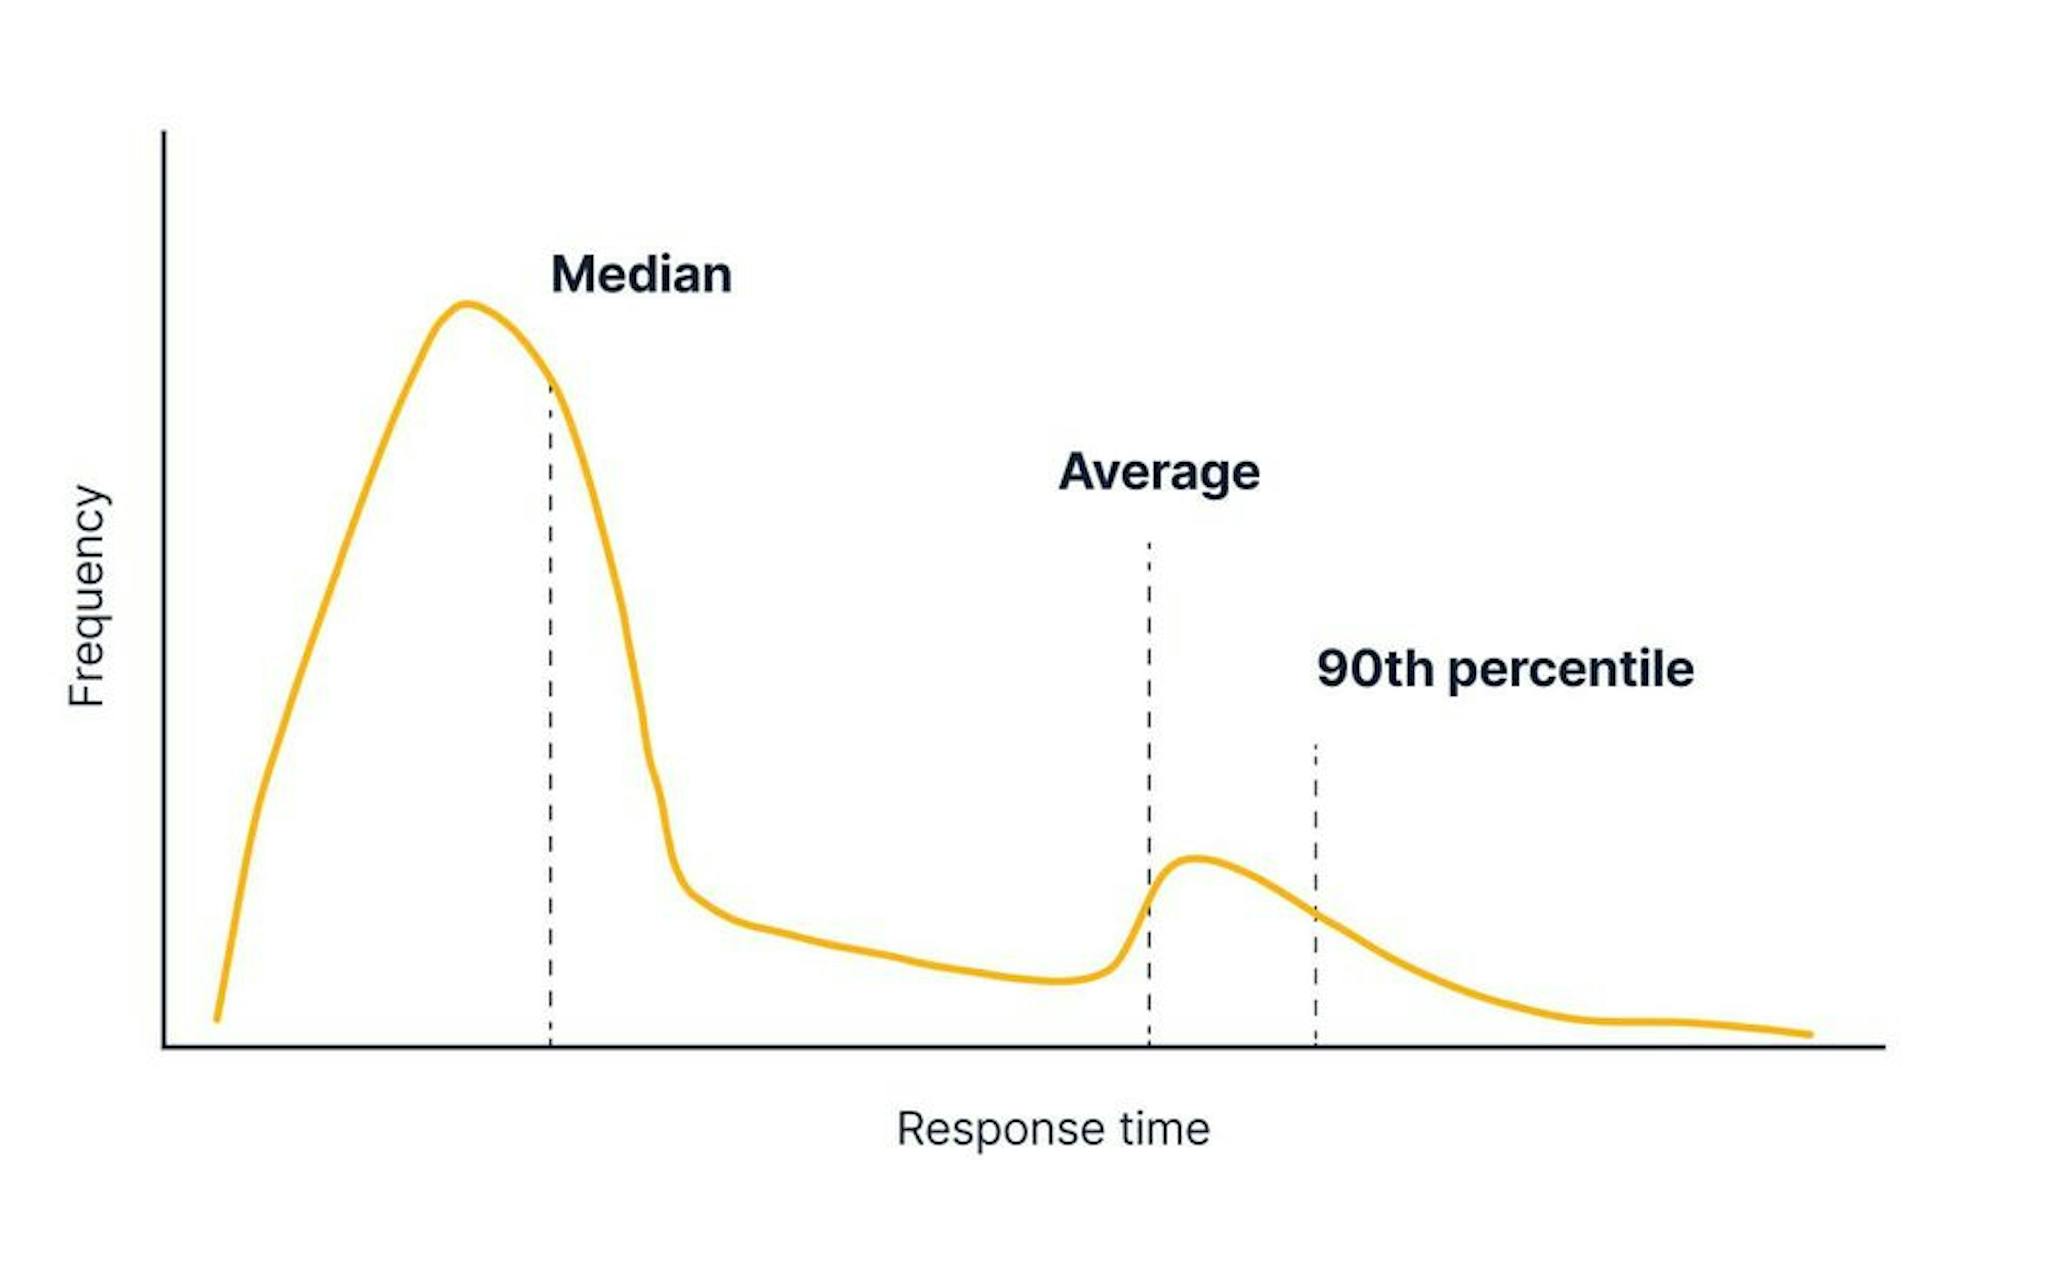 But when there are “real” effects from responses that impact more than 10% of users, the 90th percentile shifts dramatically  (Graph not to scale.) 